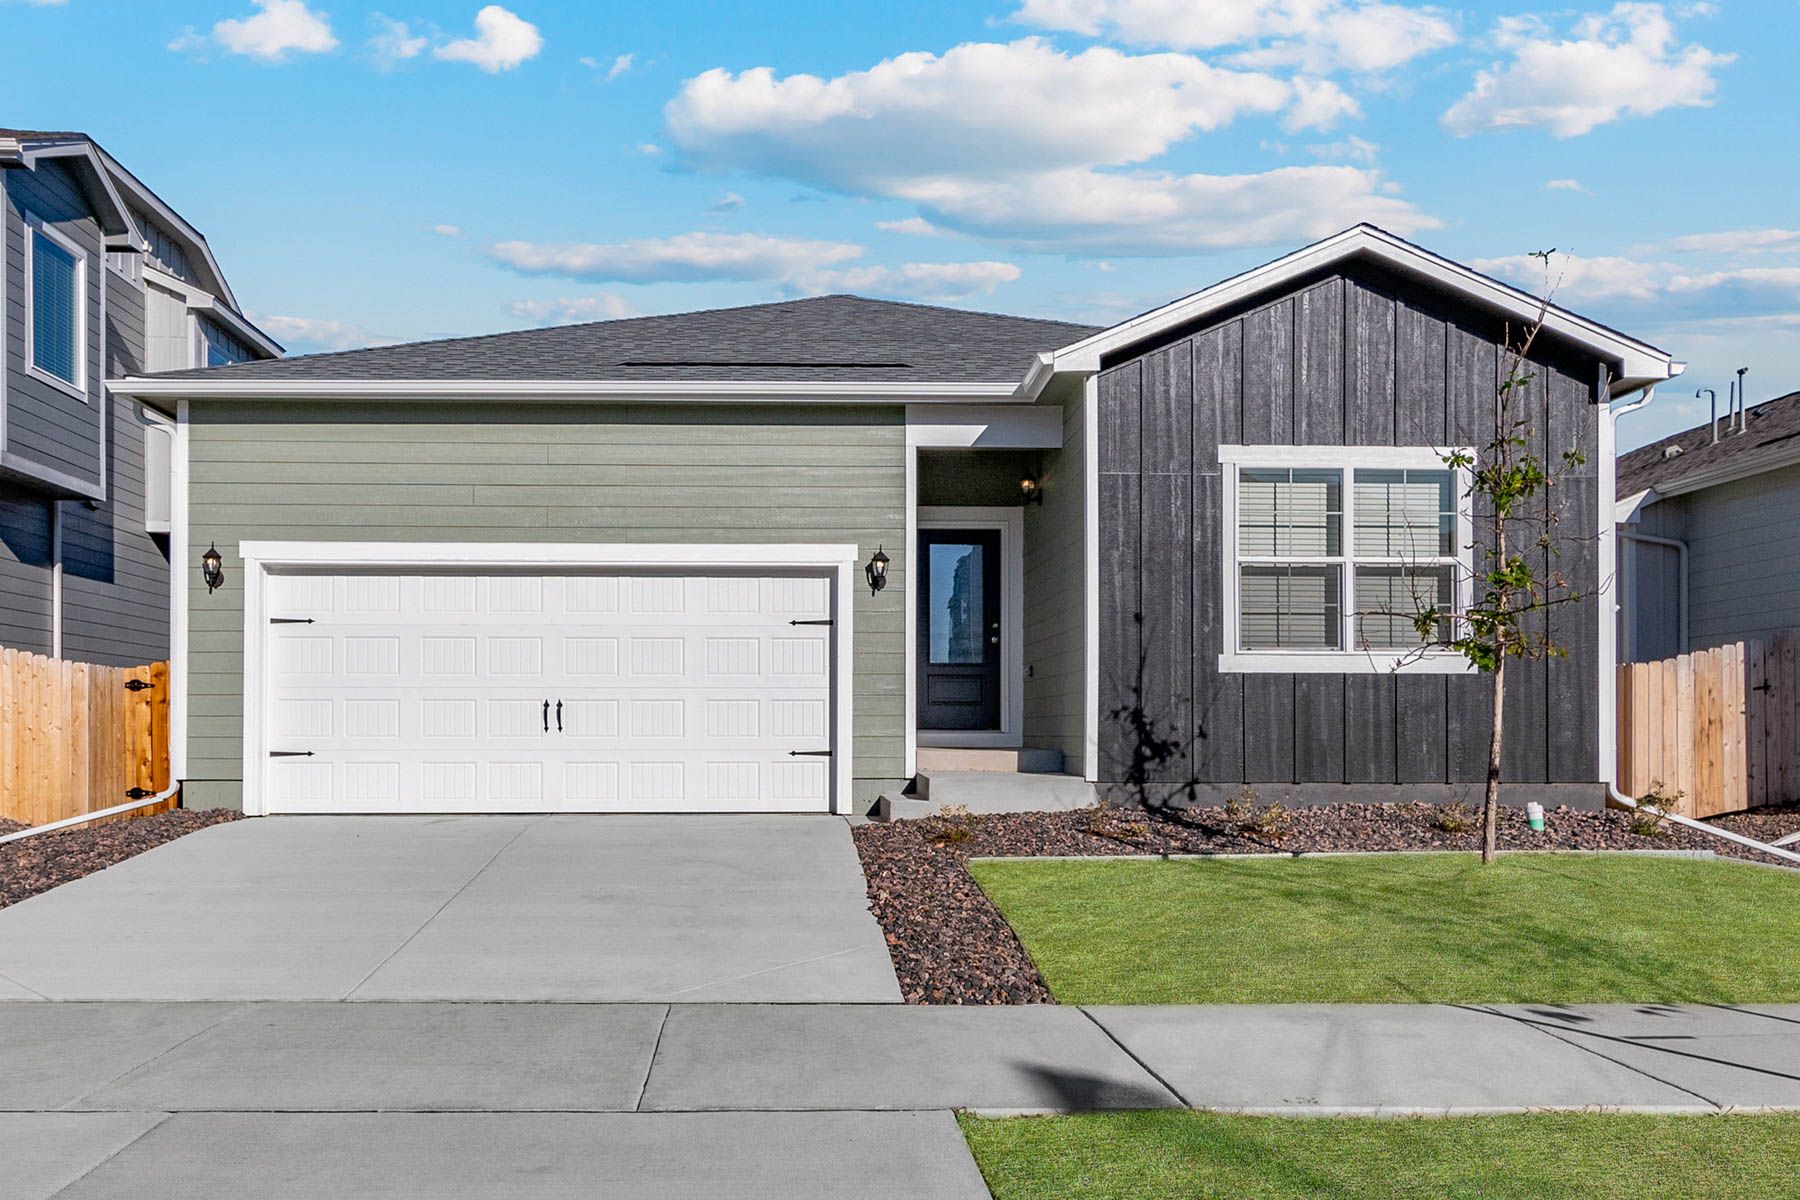 The Chatfield by LGI Homes:The Chatfield is a beautiful single story home with siding